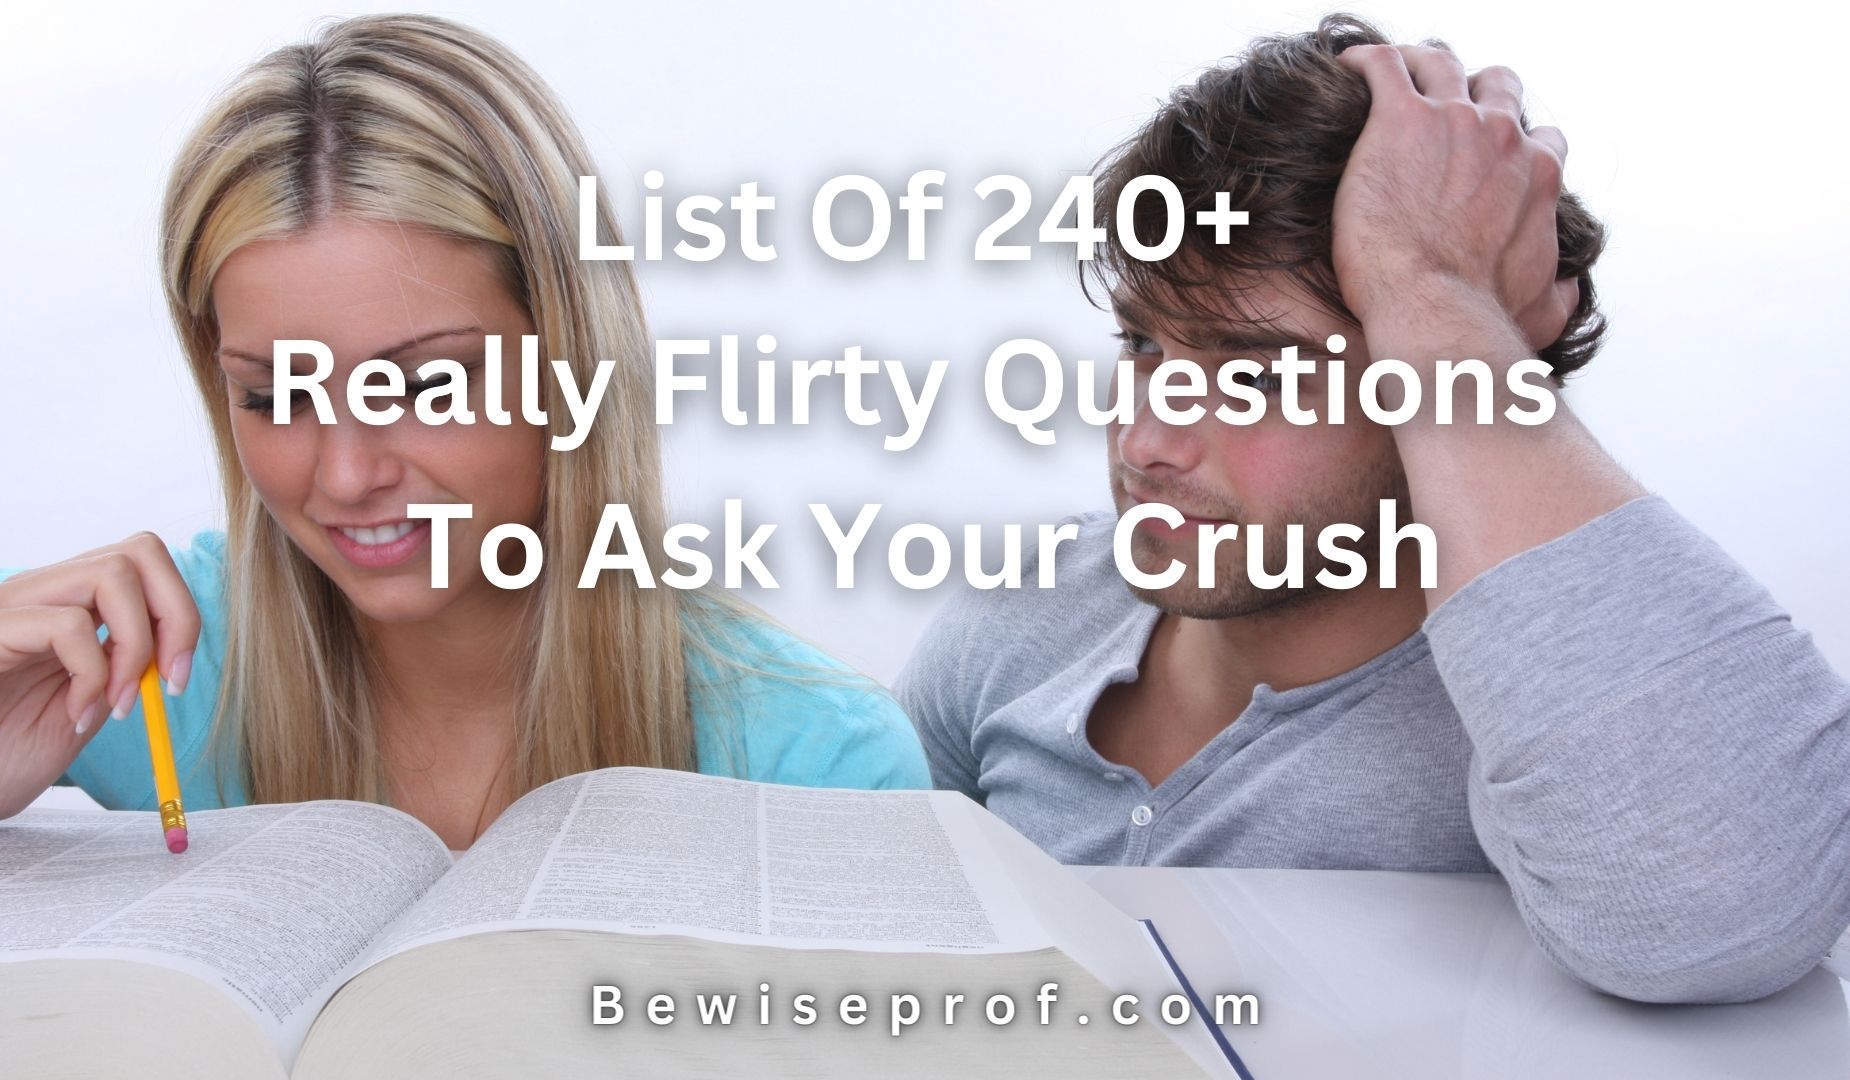 List Of 240+ Really Flirty Questions To Ask Your Crush